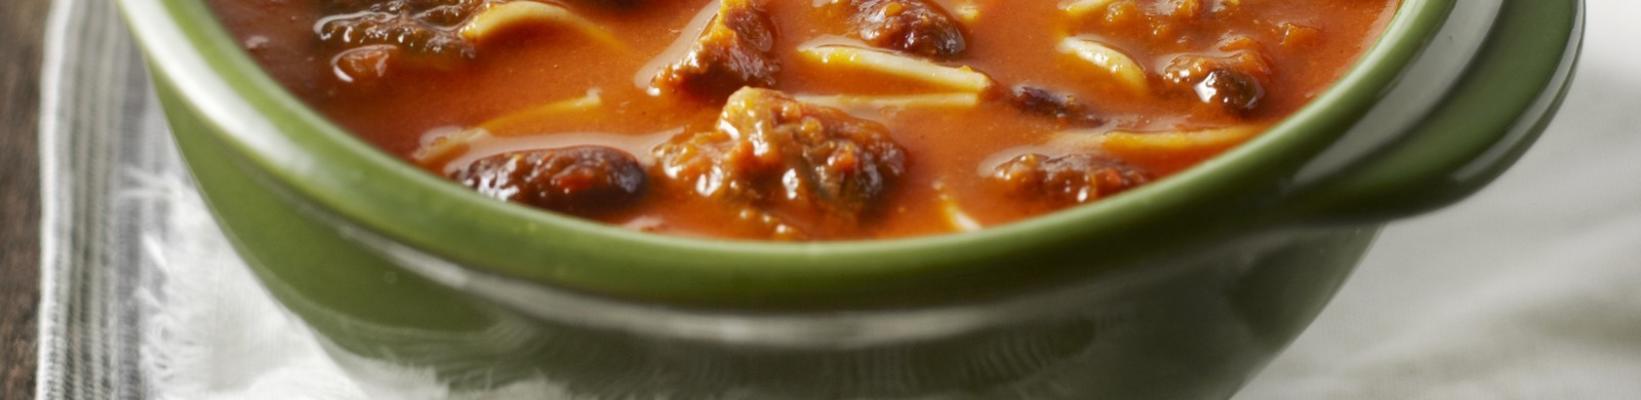 paprika soup with beef, kidney beans and tomato